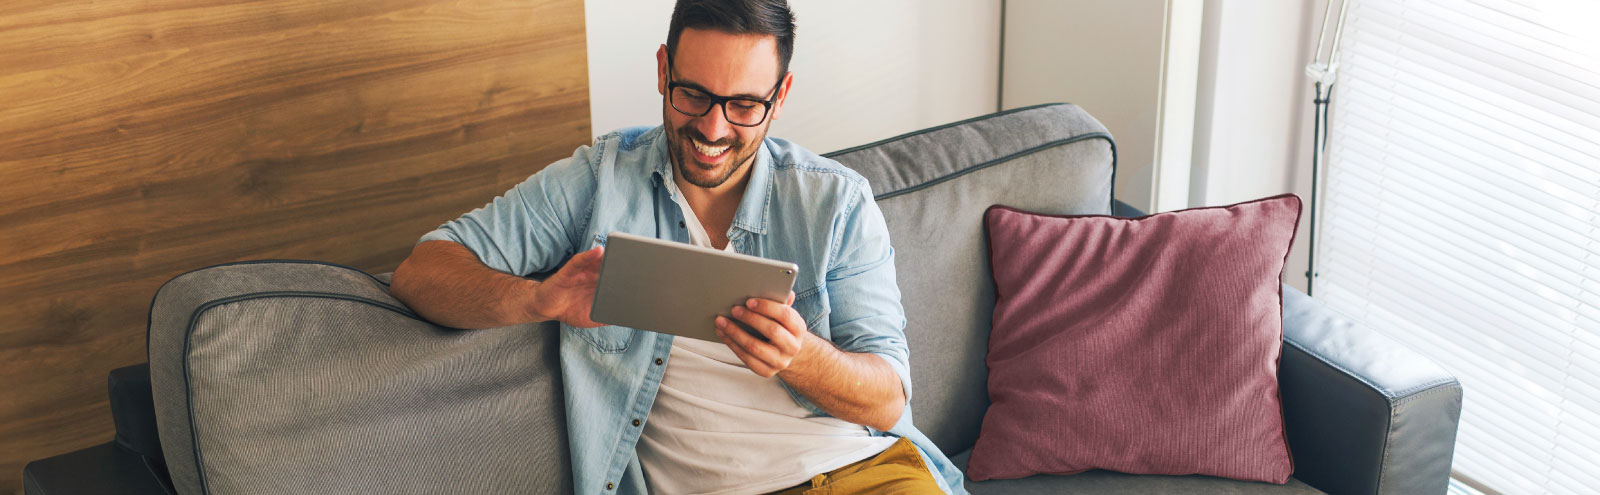 Man smiling and sitting on a couch using a tablet.